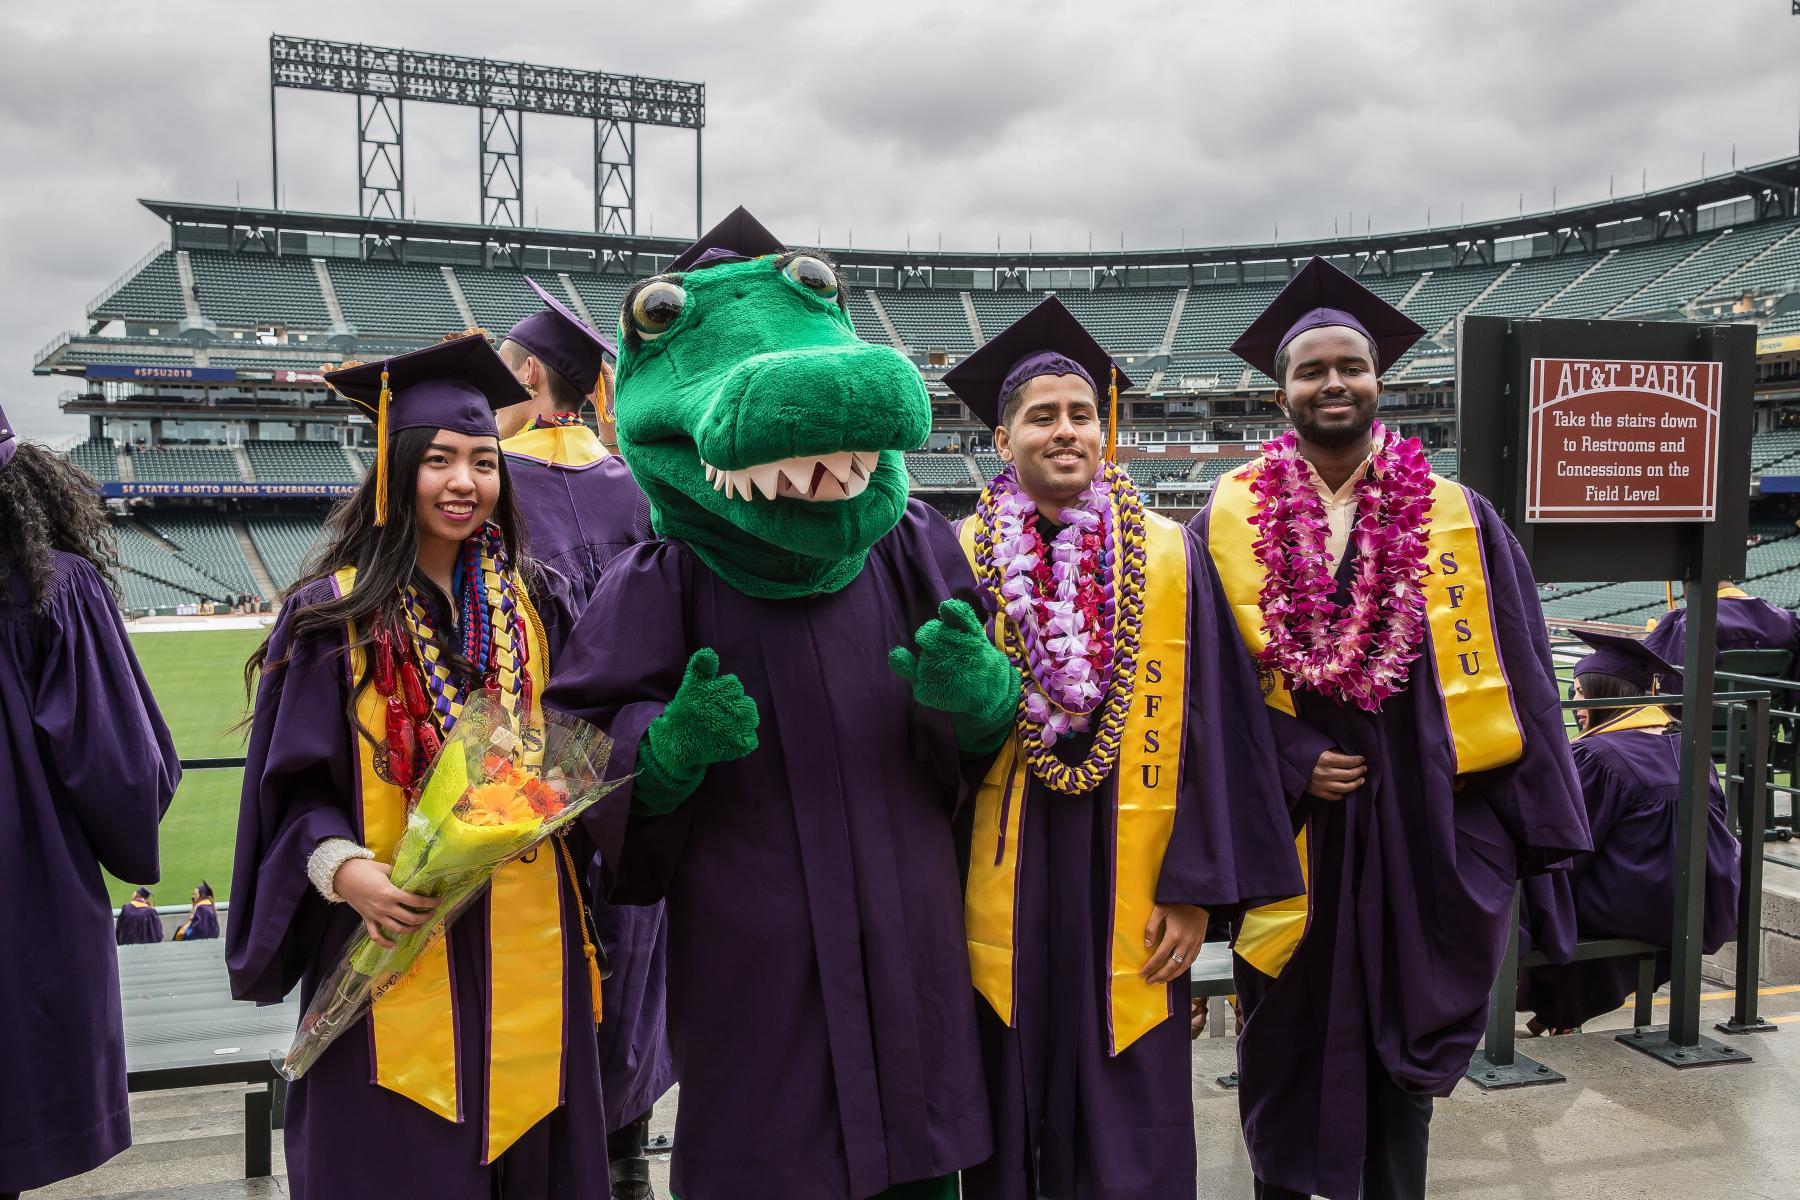 Three students dressed in graduation regalia pose with the Gator mascot at AT&T park.